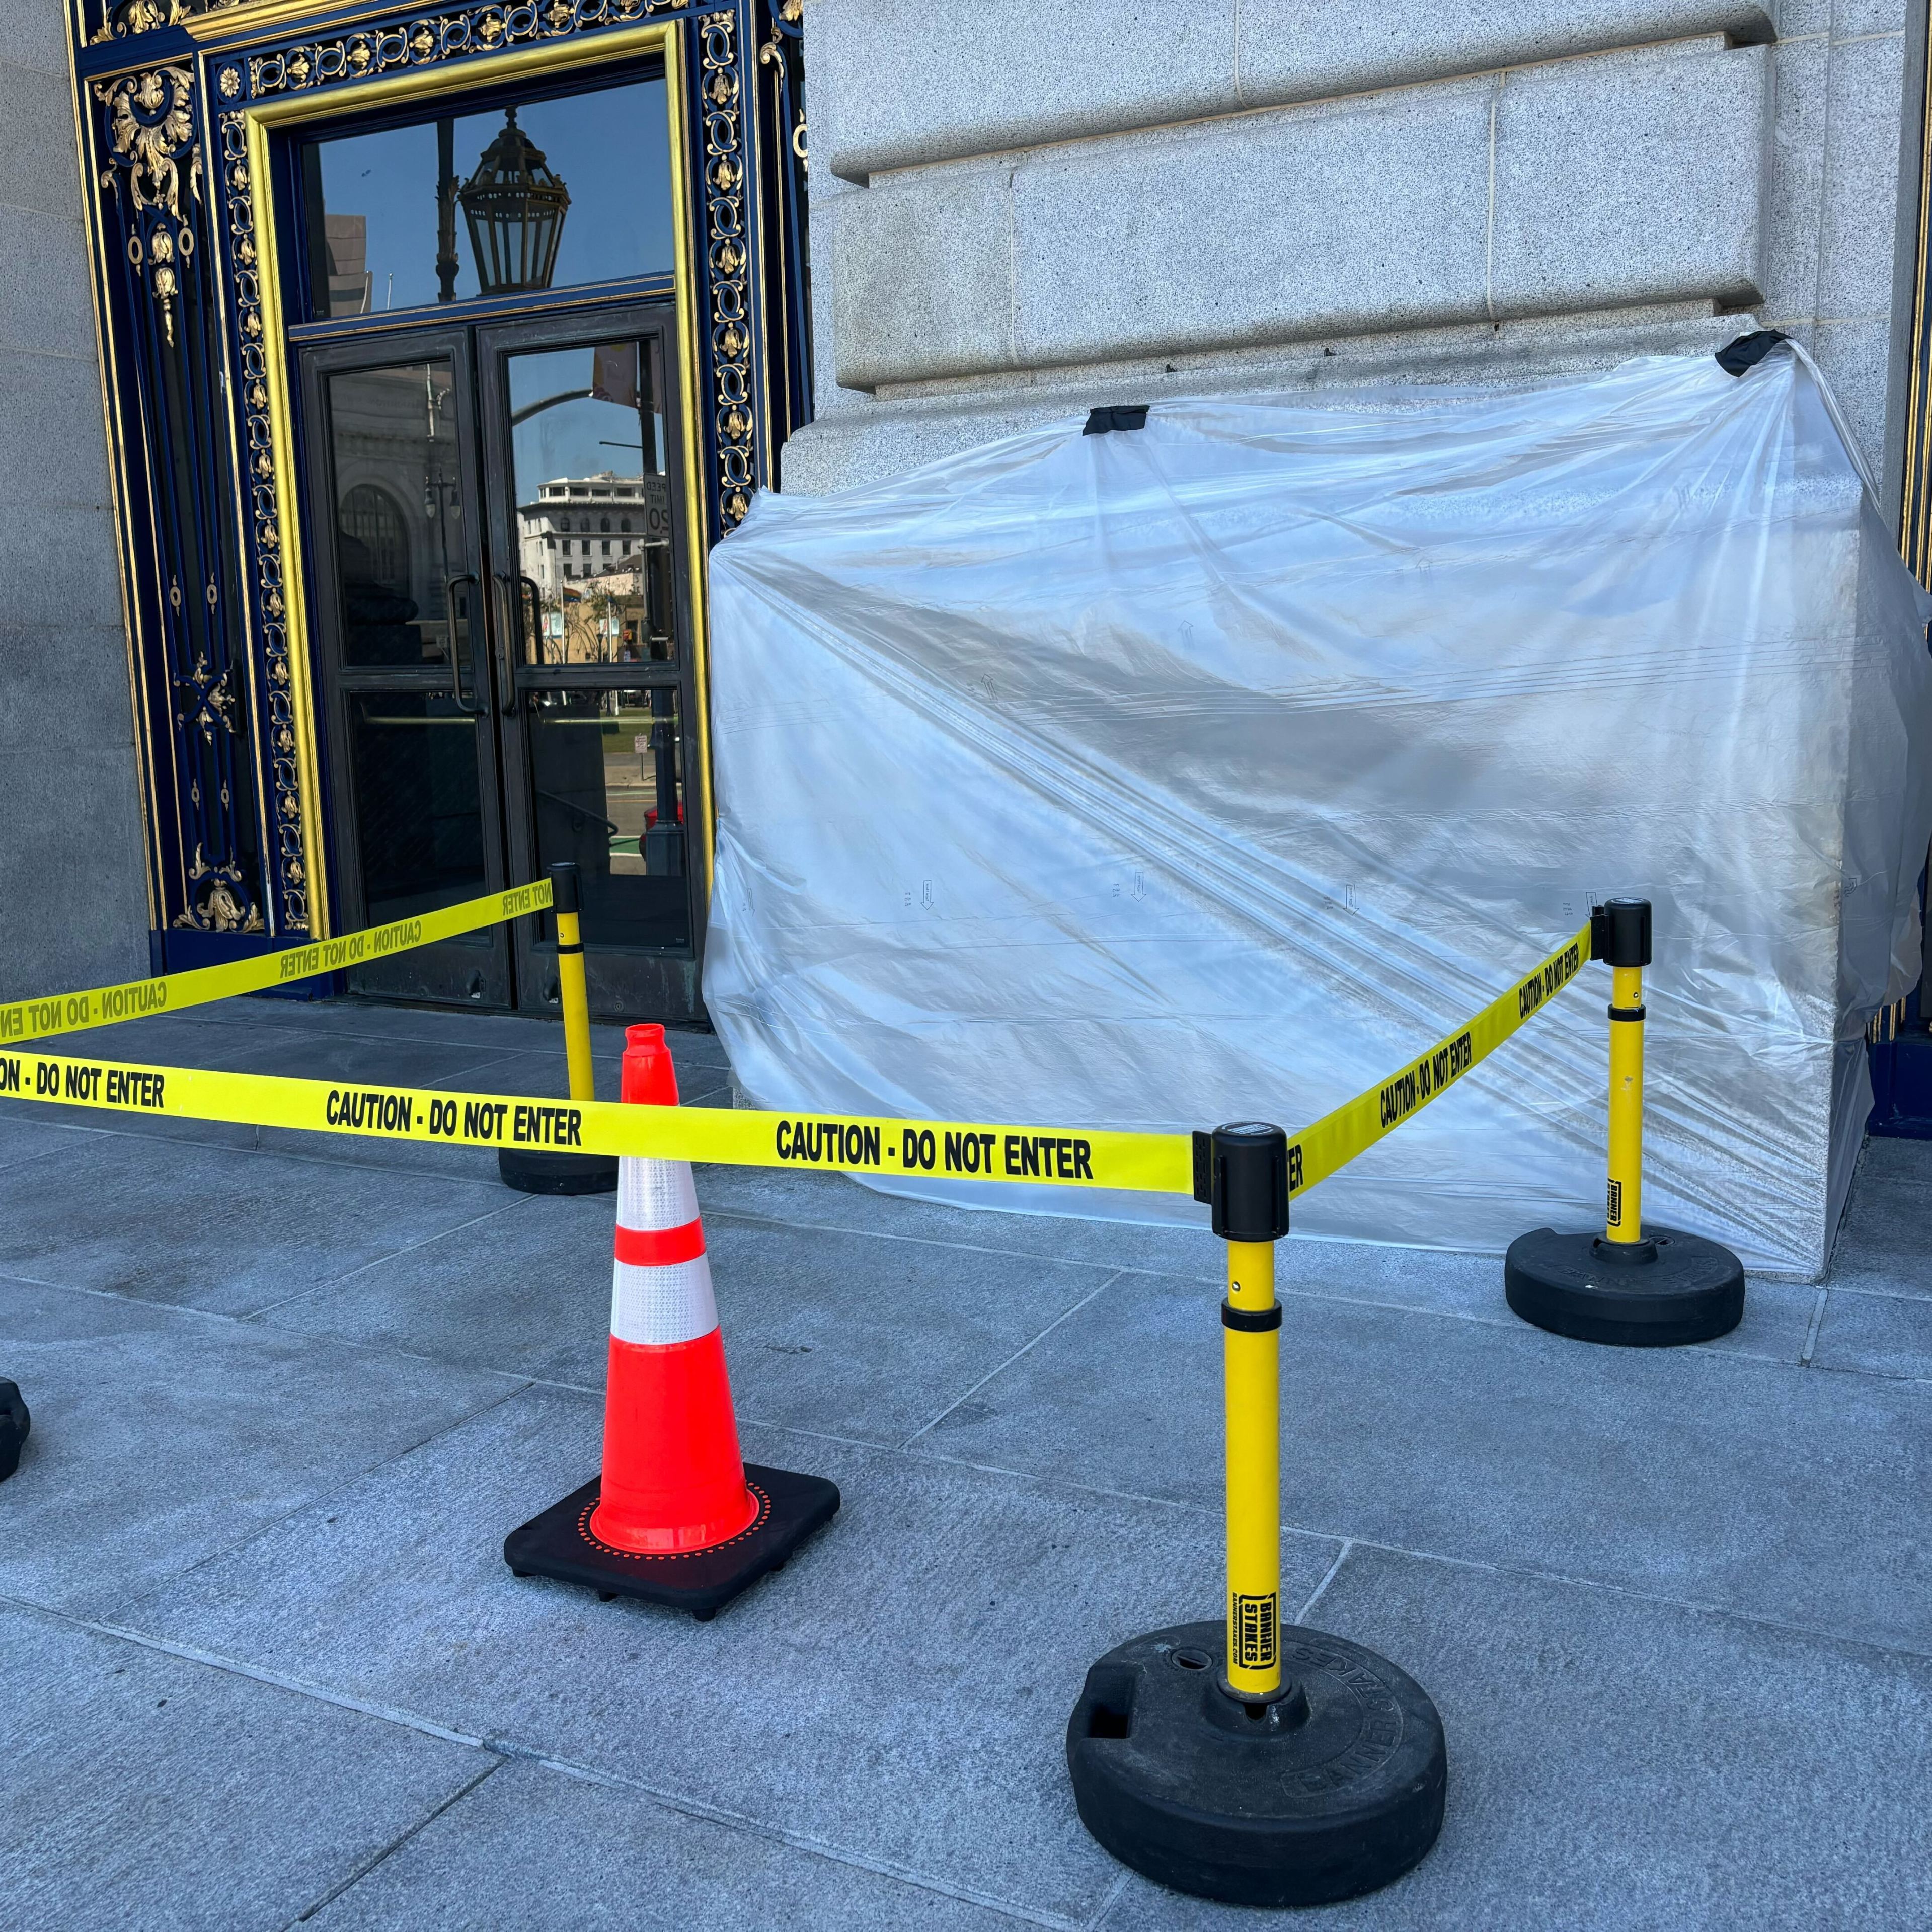 A doorway is blocked by "Caution - Do Not Enter" tape and a traffic cone. A large object covered in plastic is situated next to the door.